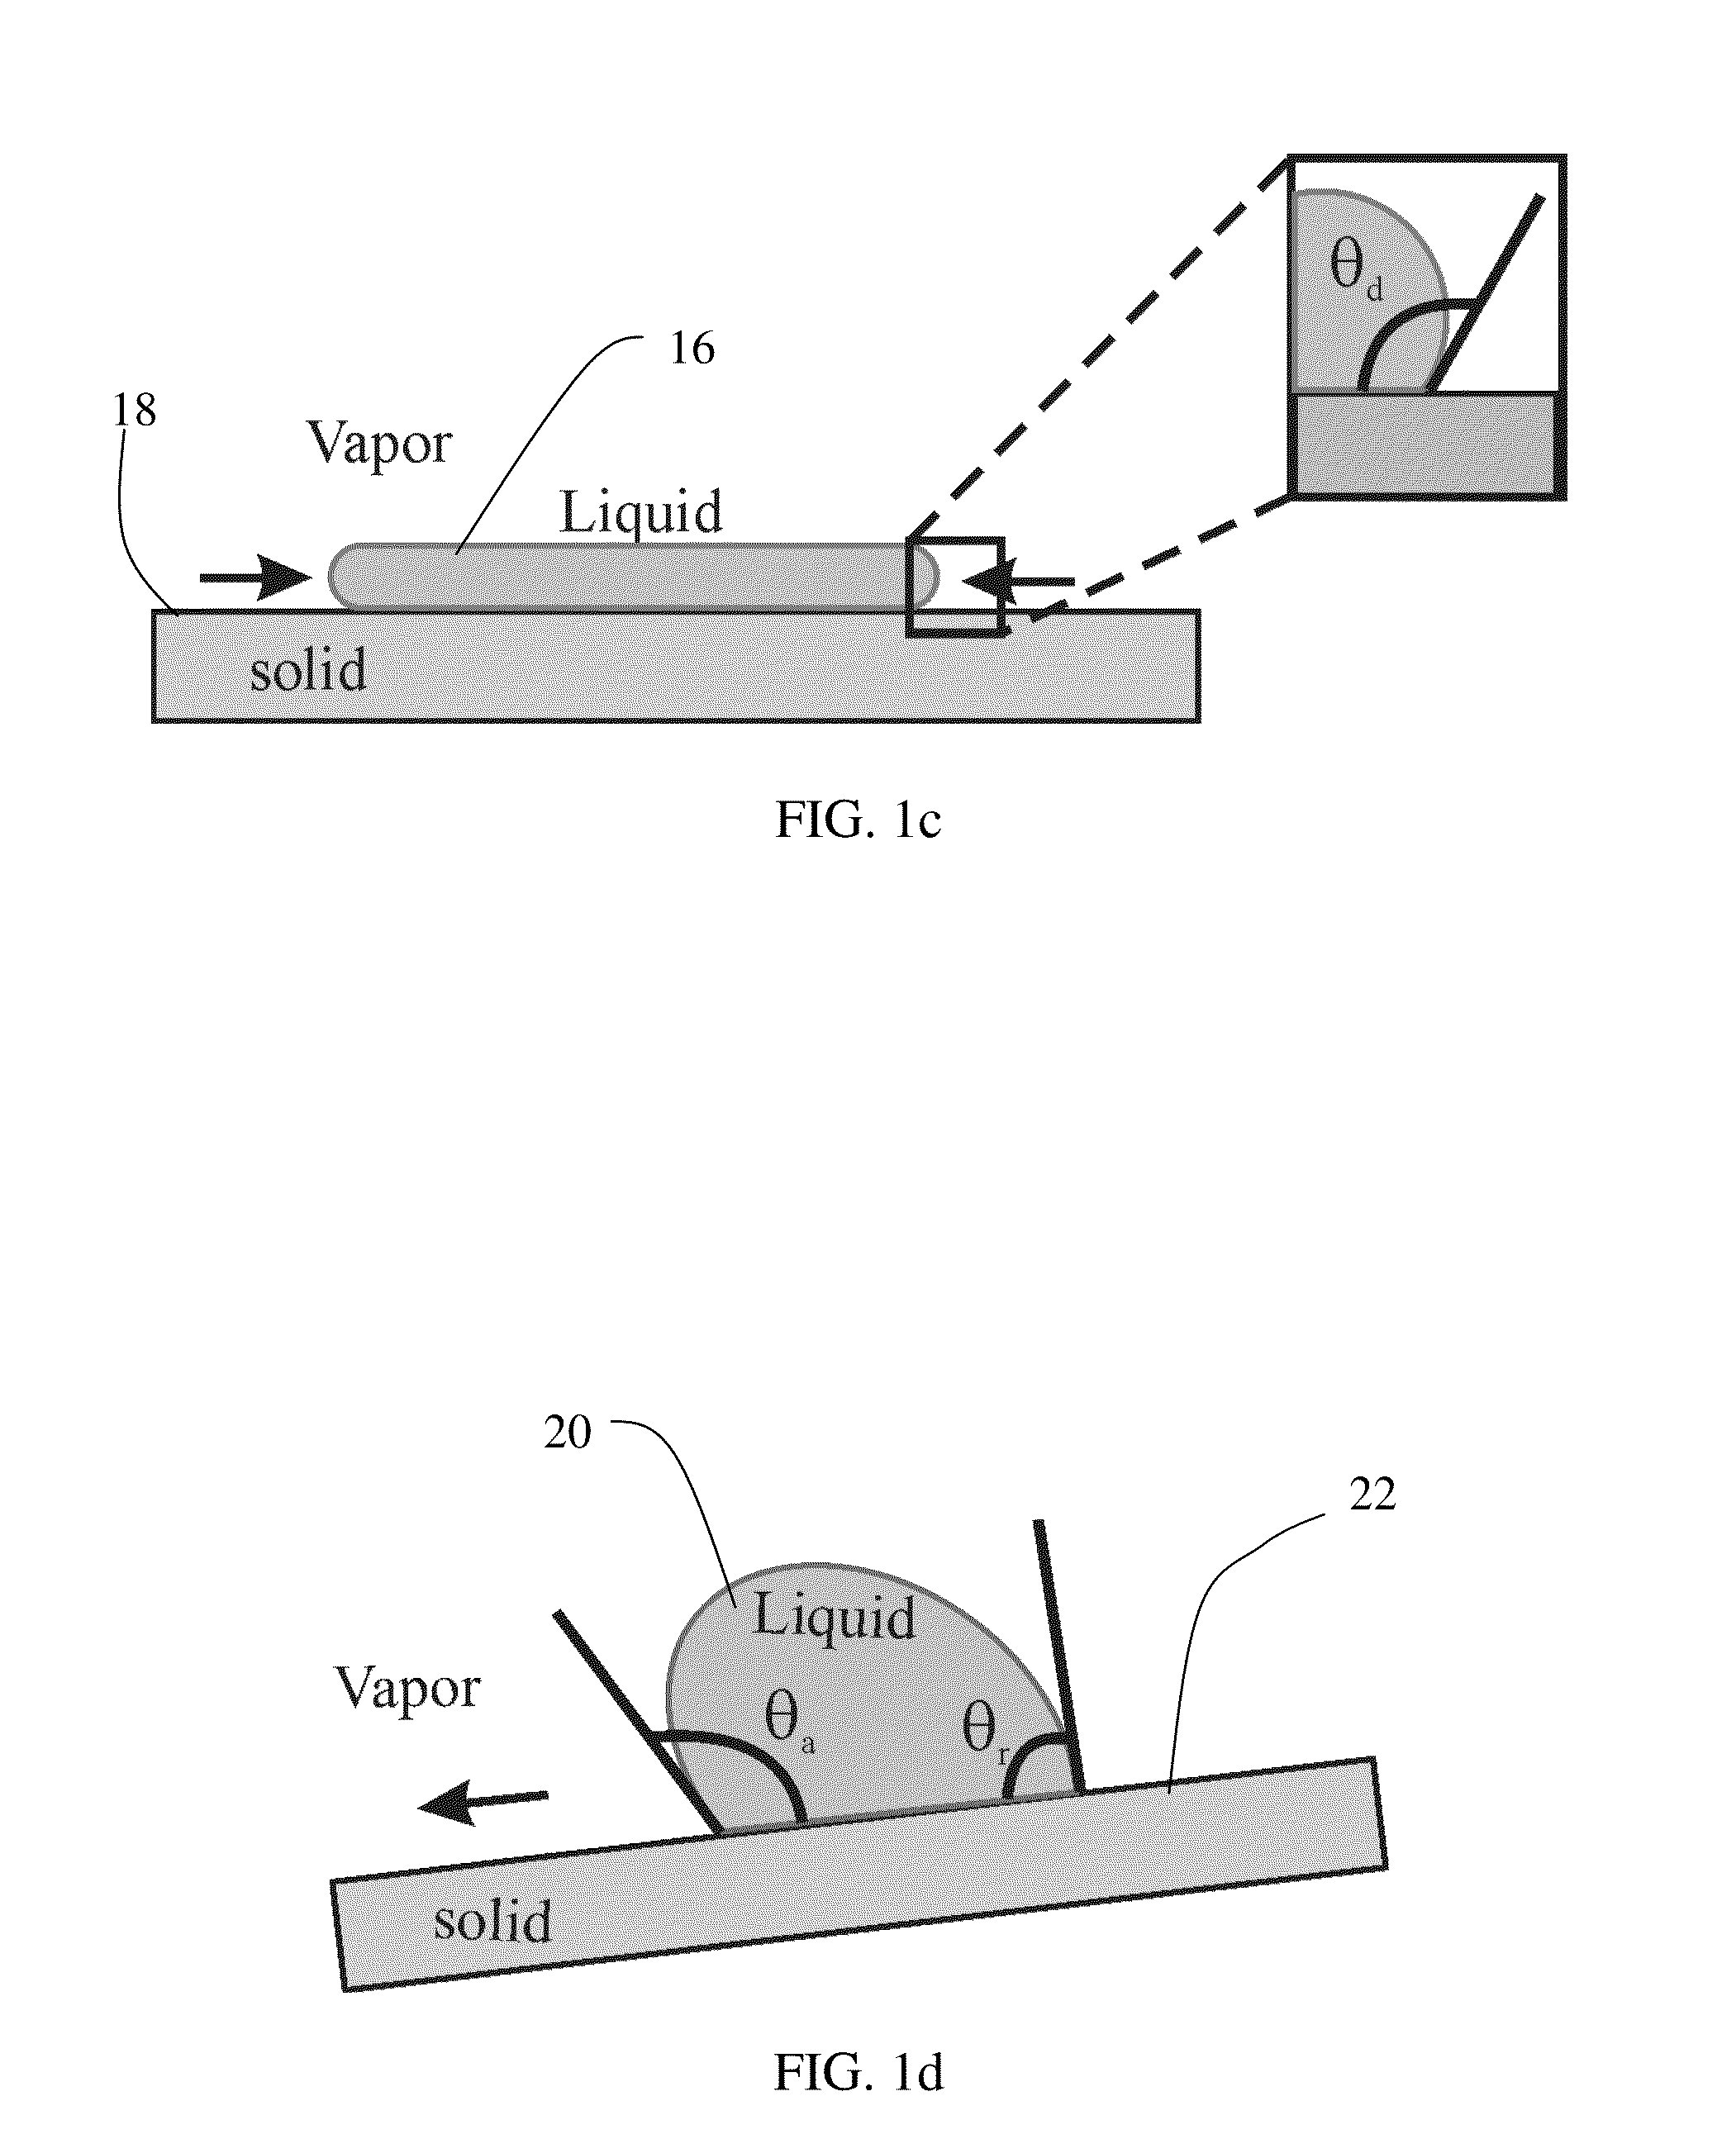 Articles for manipulating impinging liquids and methods of manufacturing same